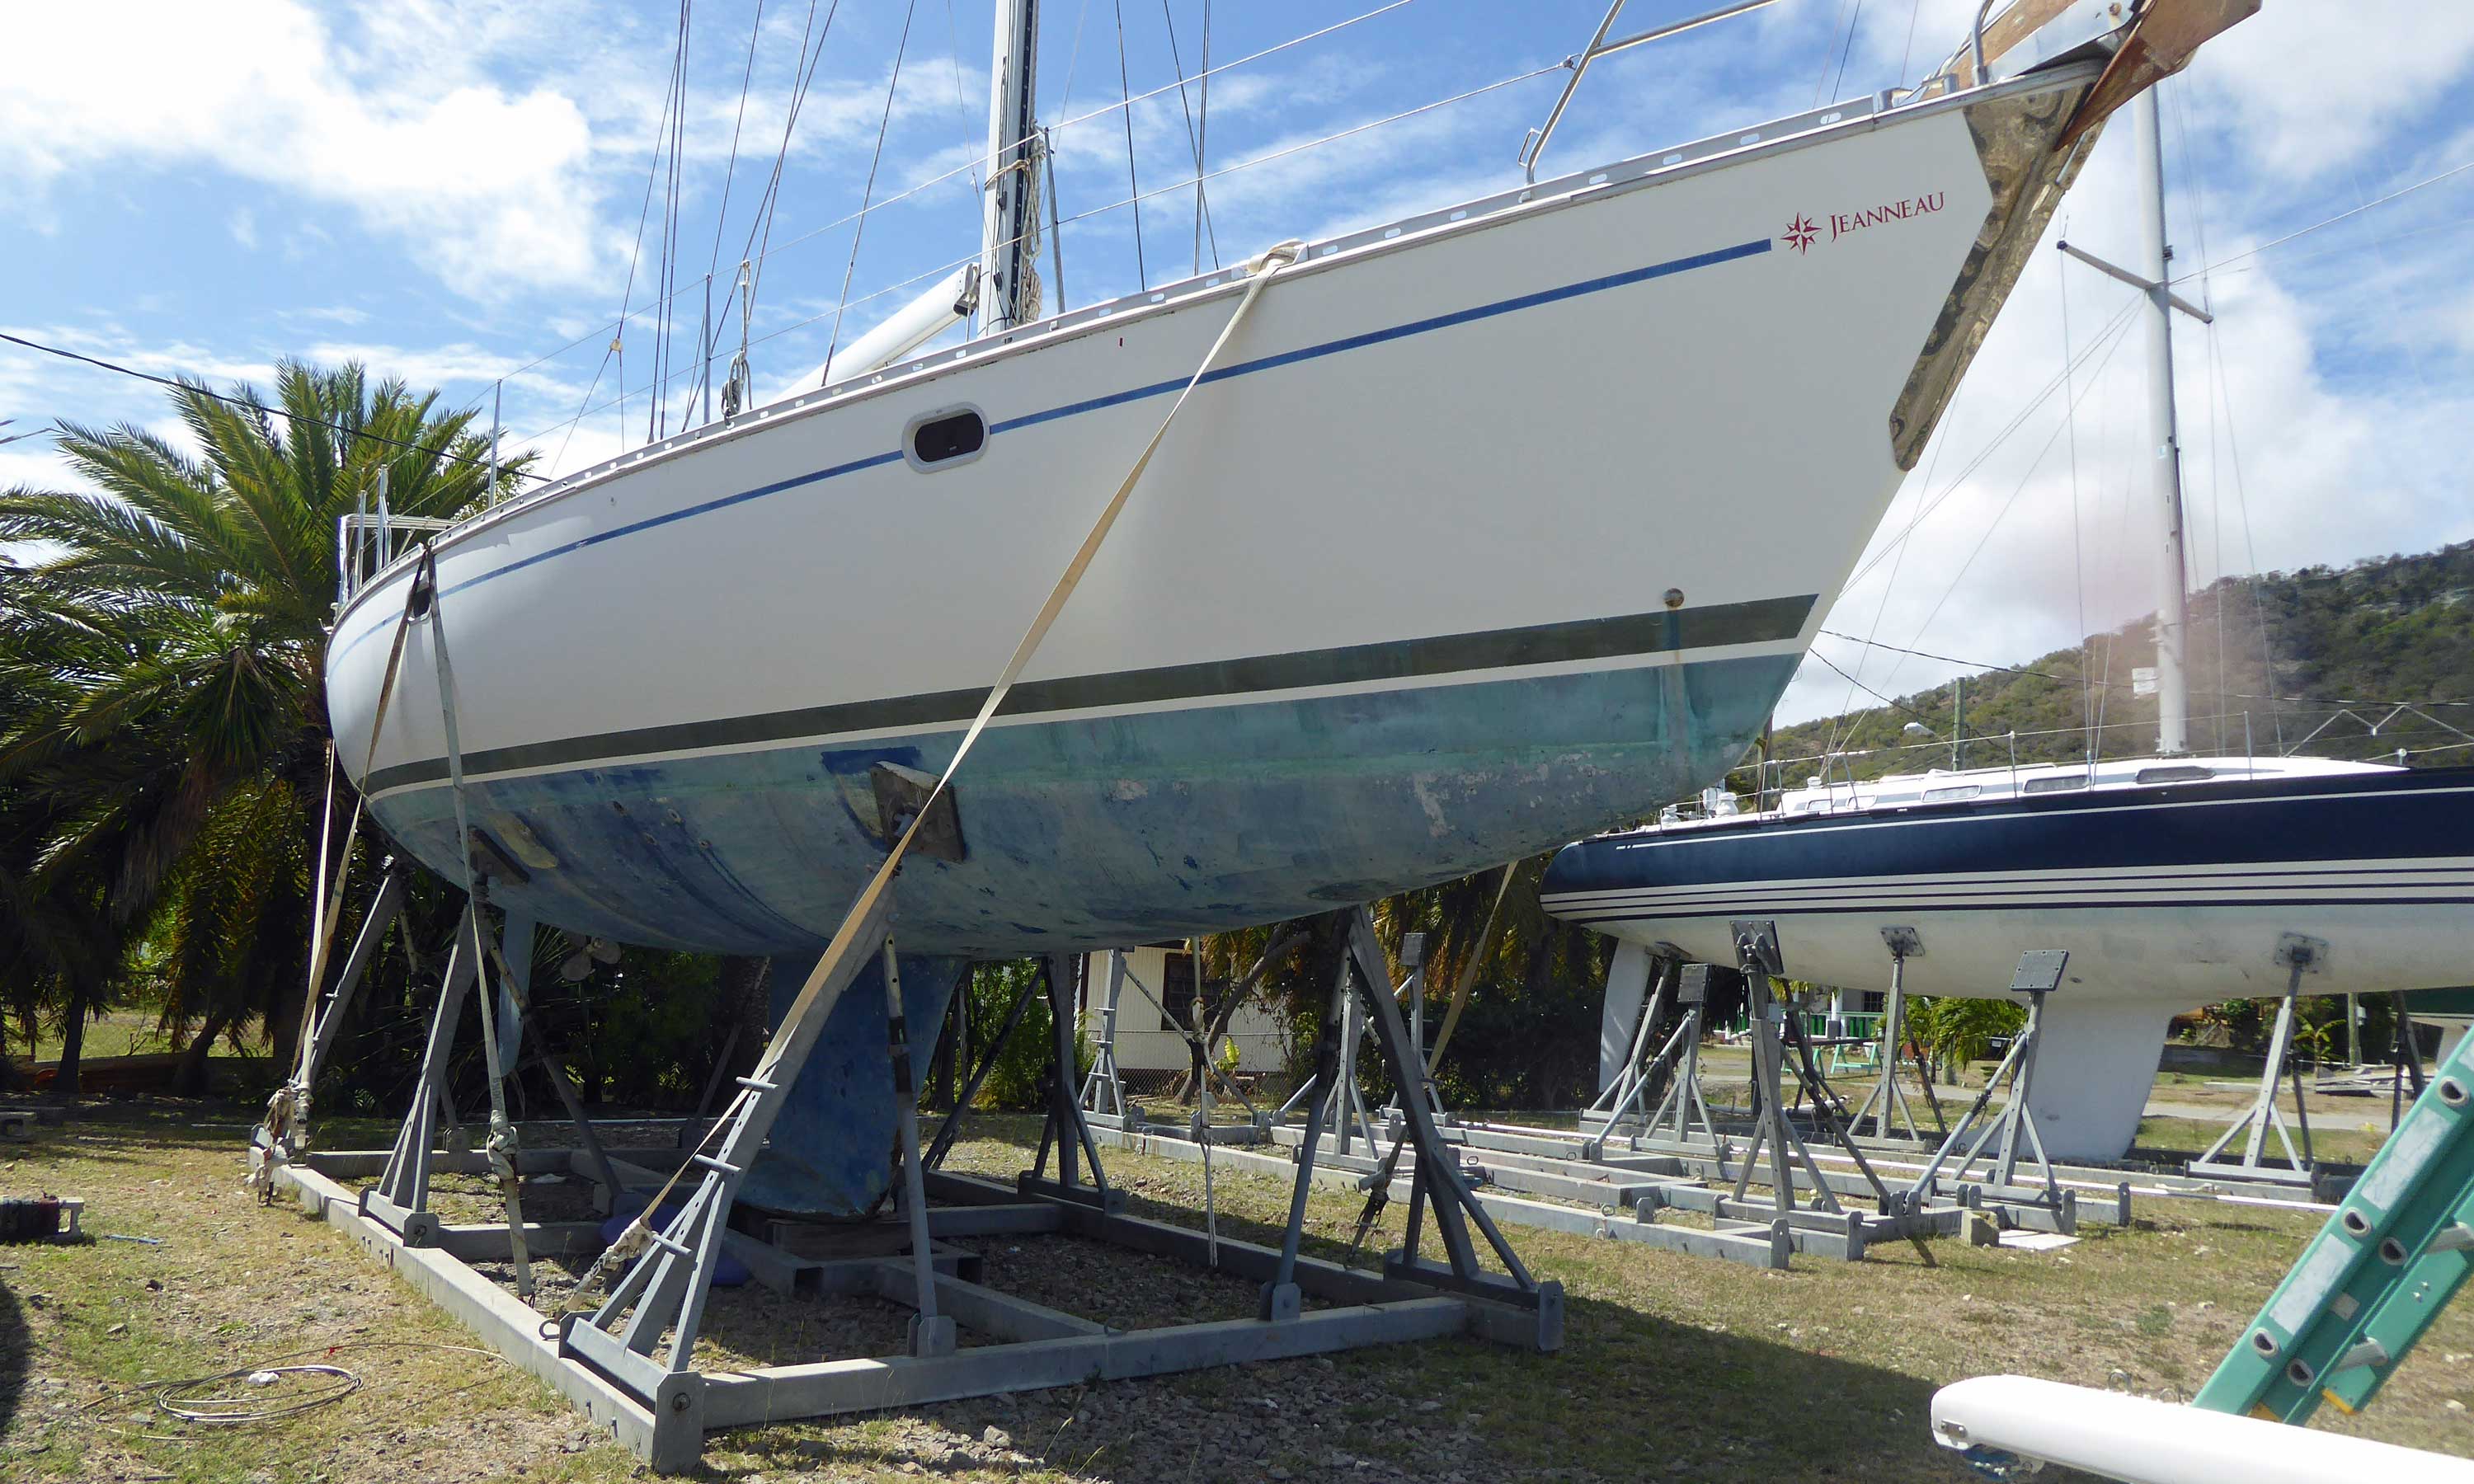 A boat stored in a cradle with tie downs for the Caribbean hurricane season